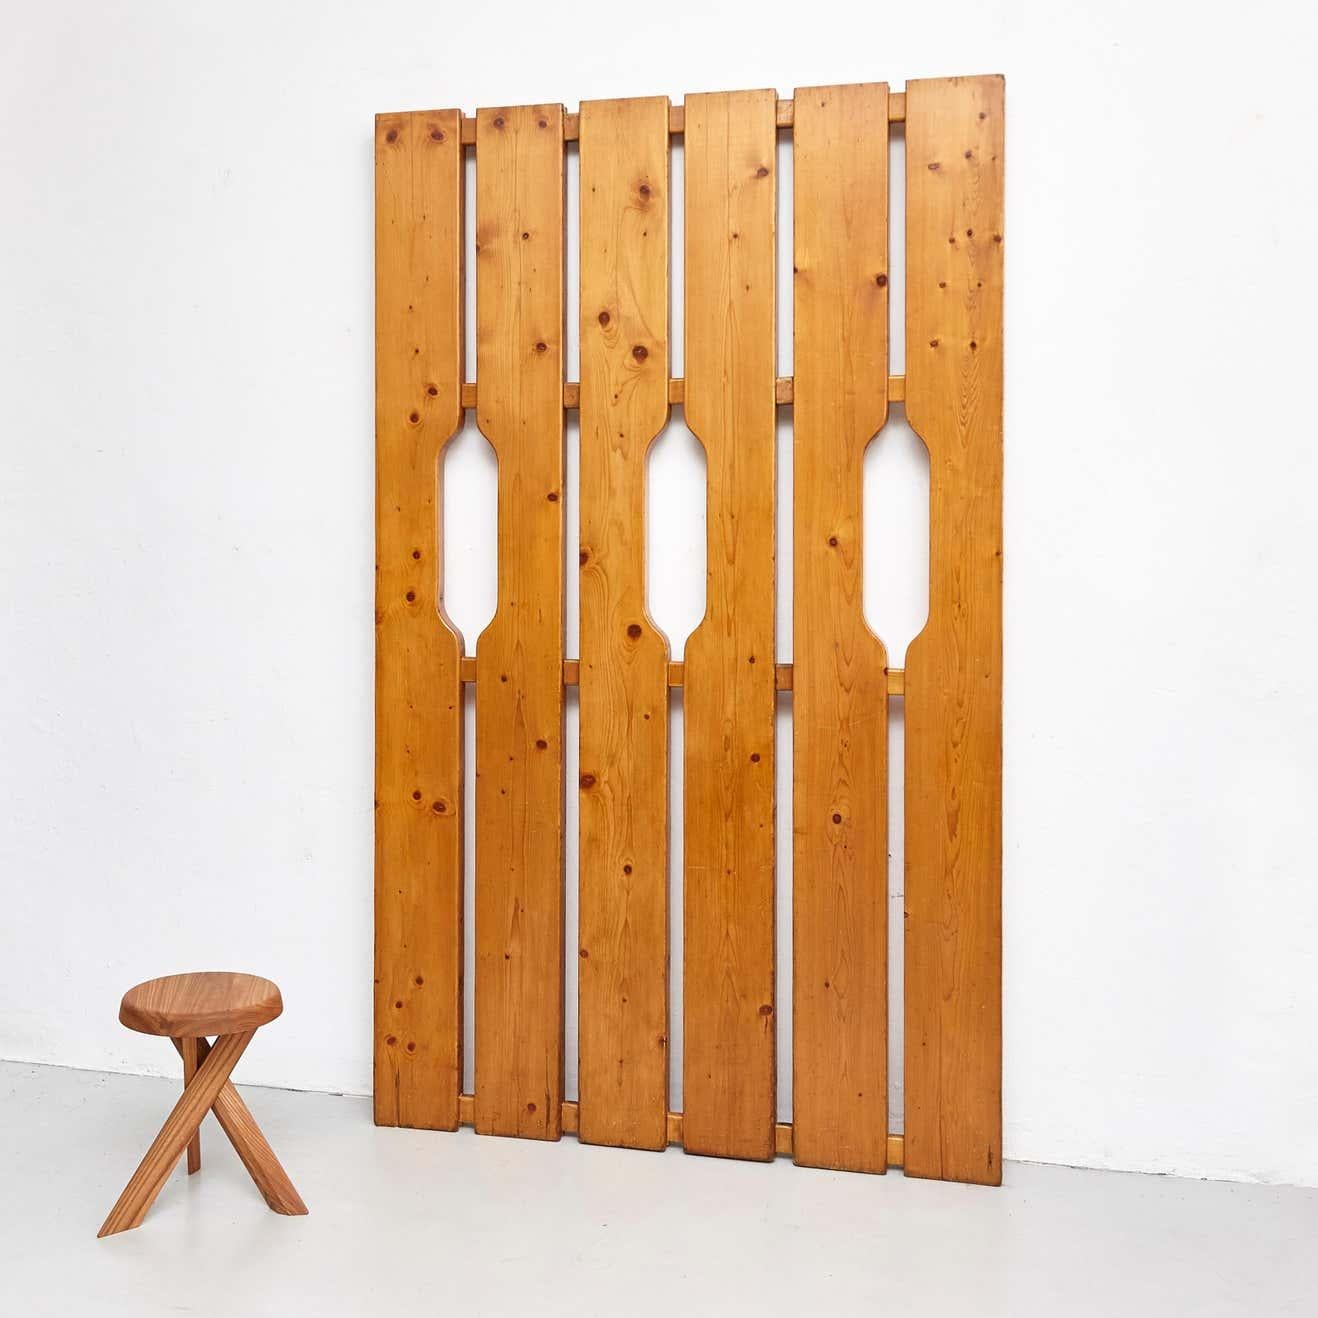 Charlotte Perriand Mid-Century Modern Wood Architectural Piece, circa 1960 For Sale 10